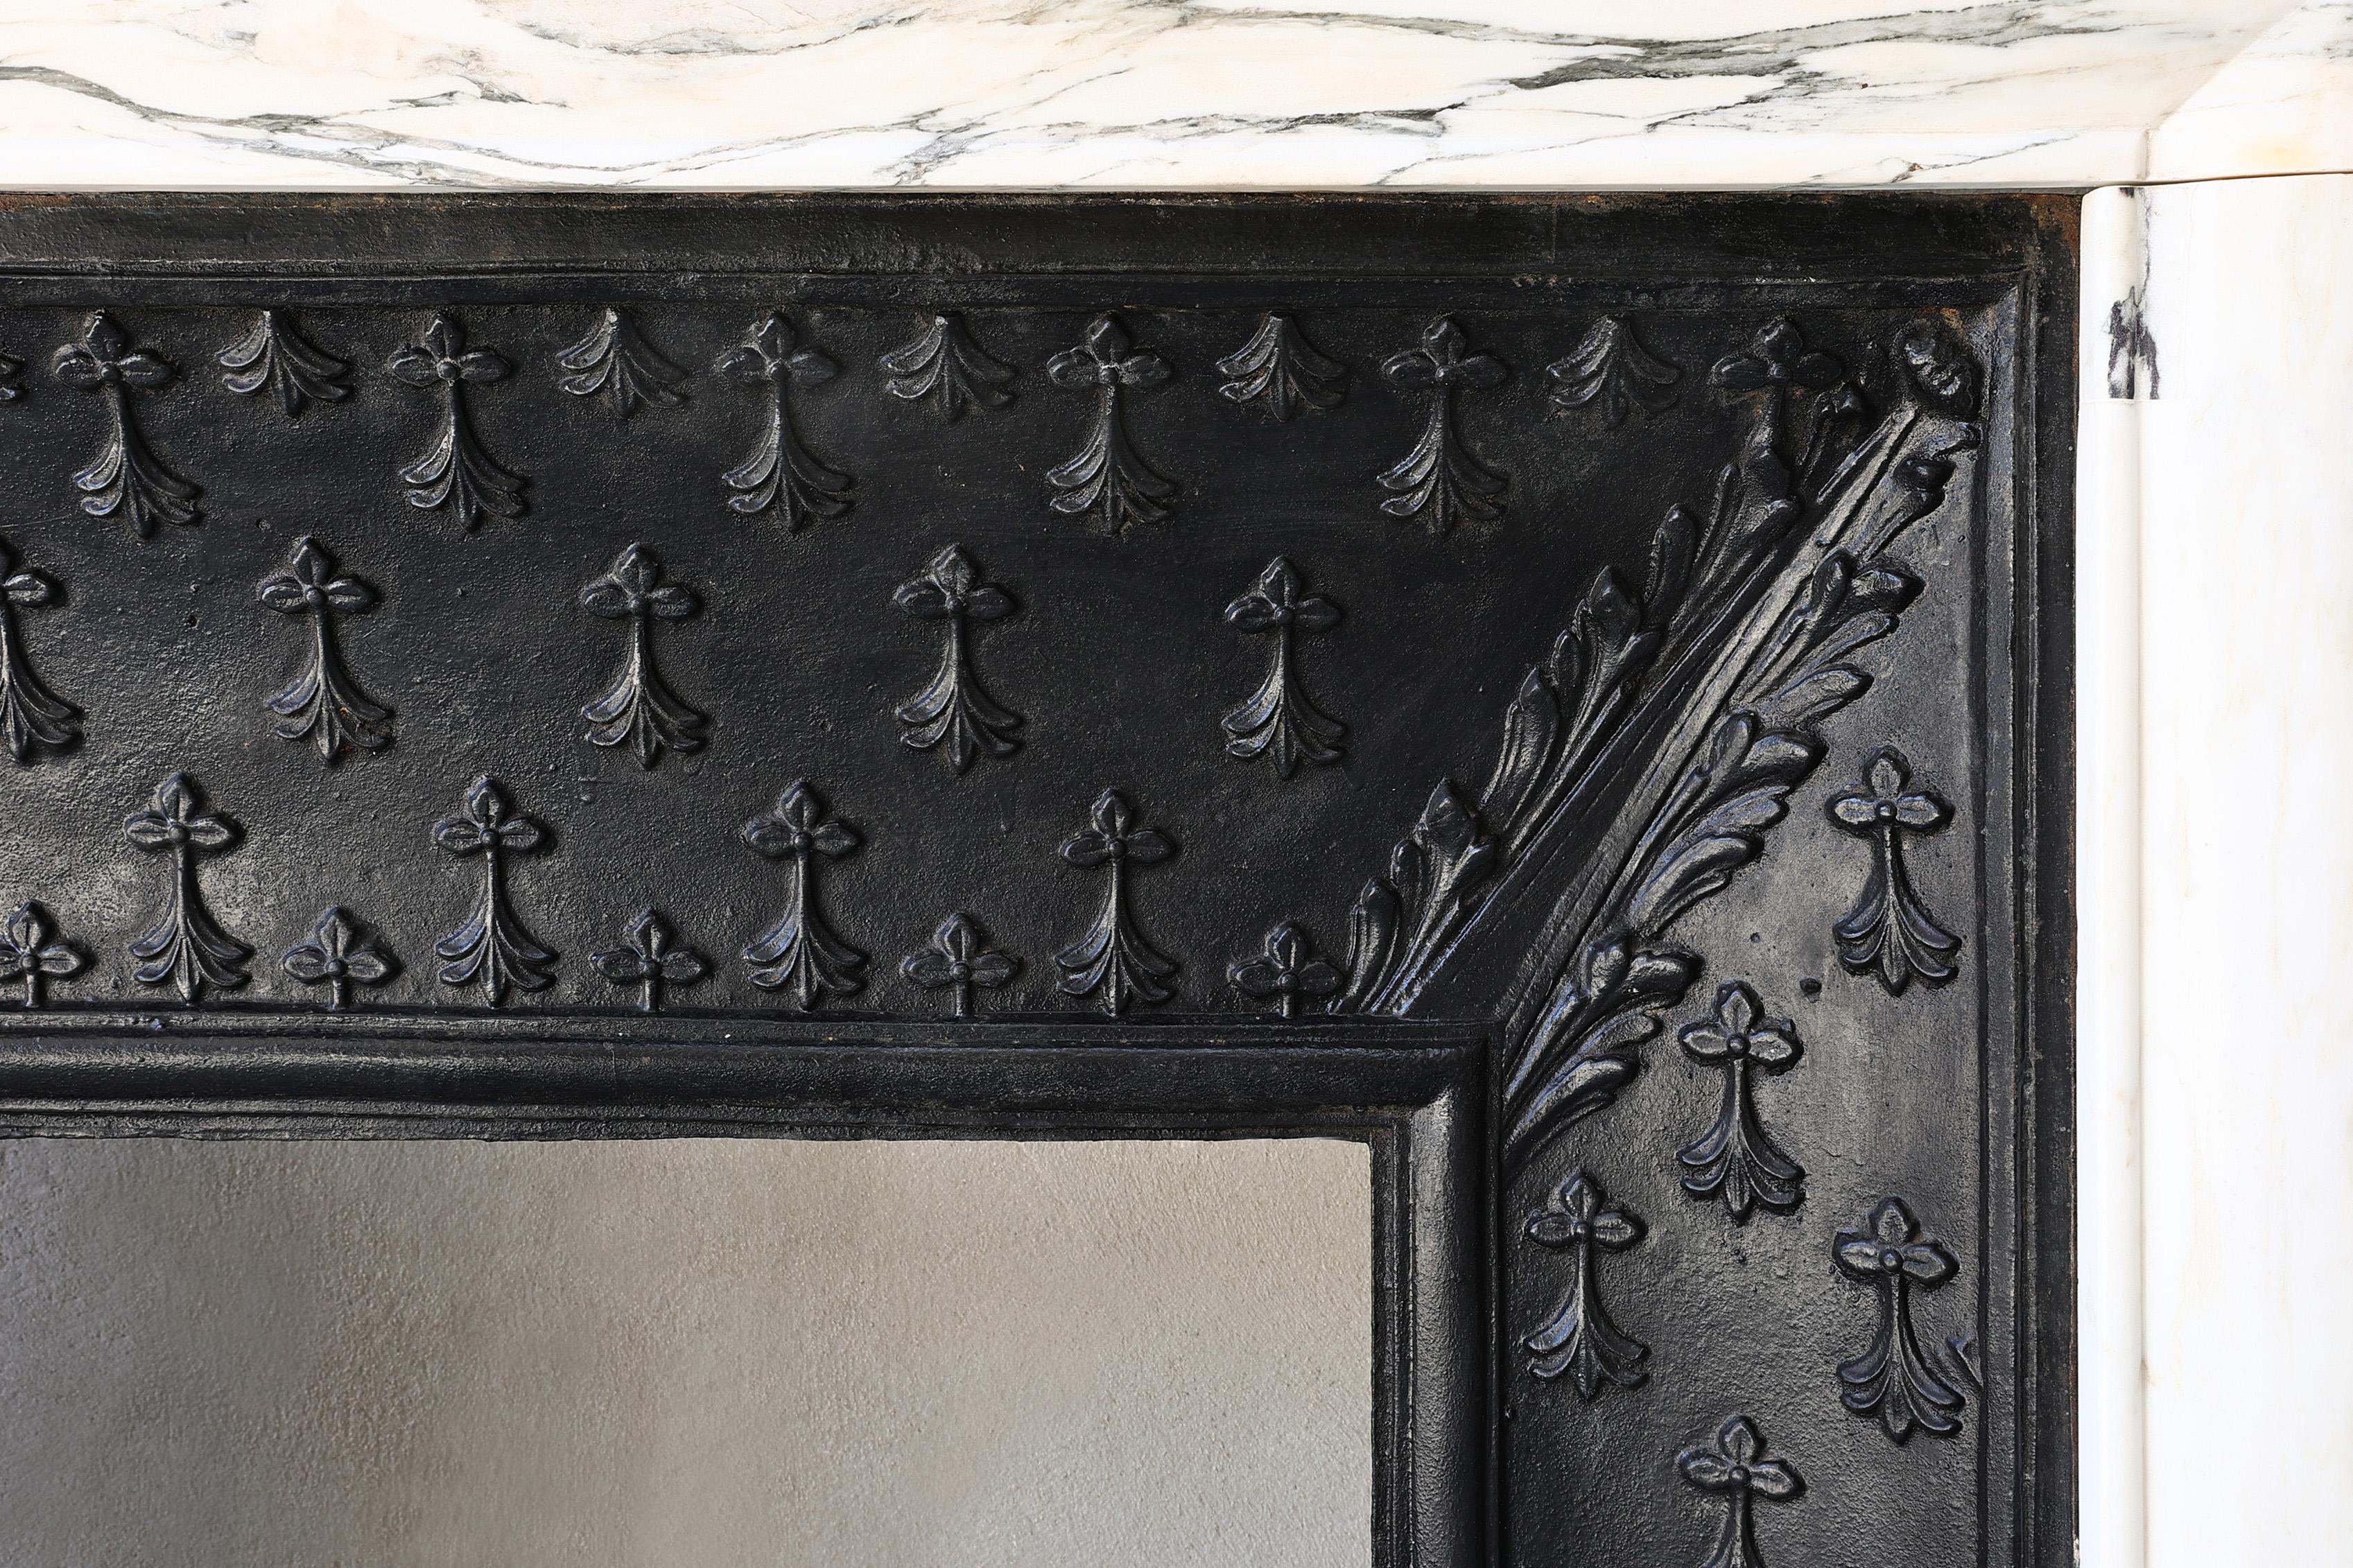 Beautiful Carrara marble mantelpiece with cast iron insert from the 19th century in the style of Louis XIV. A mantelpiece with straight shapes, flutes on the legs and a warm appearance! The cast iron insert is an added value to this mantel and makes